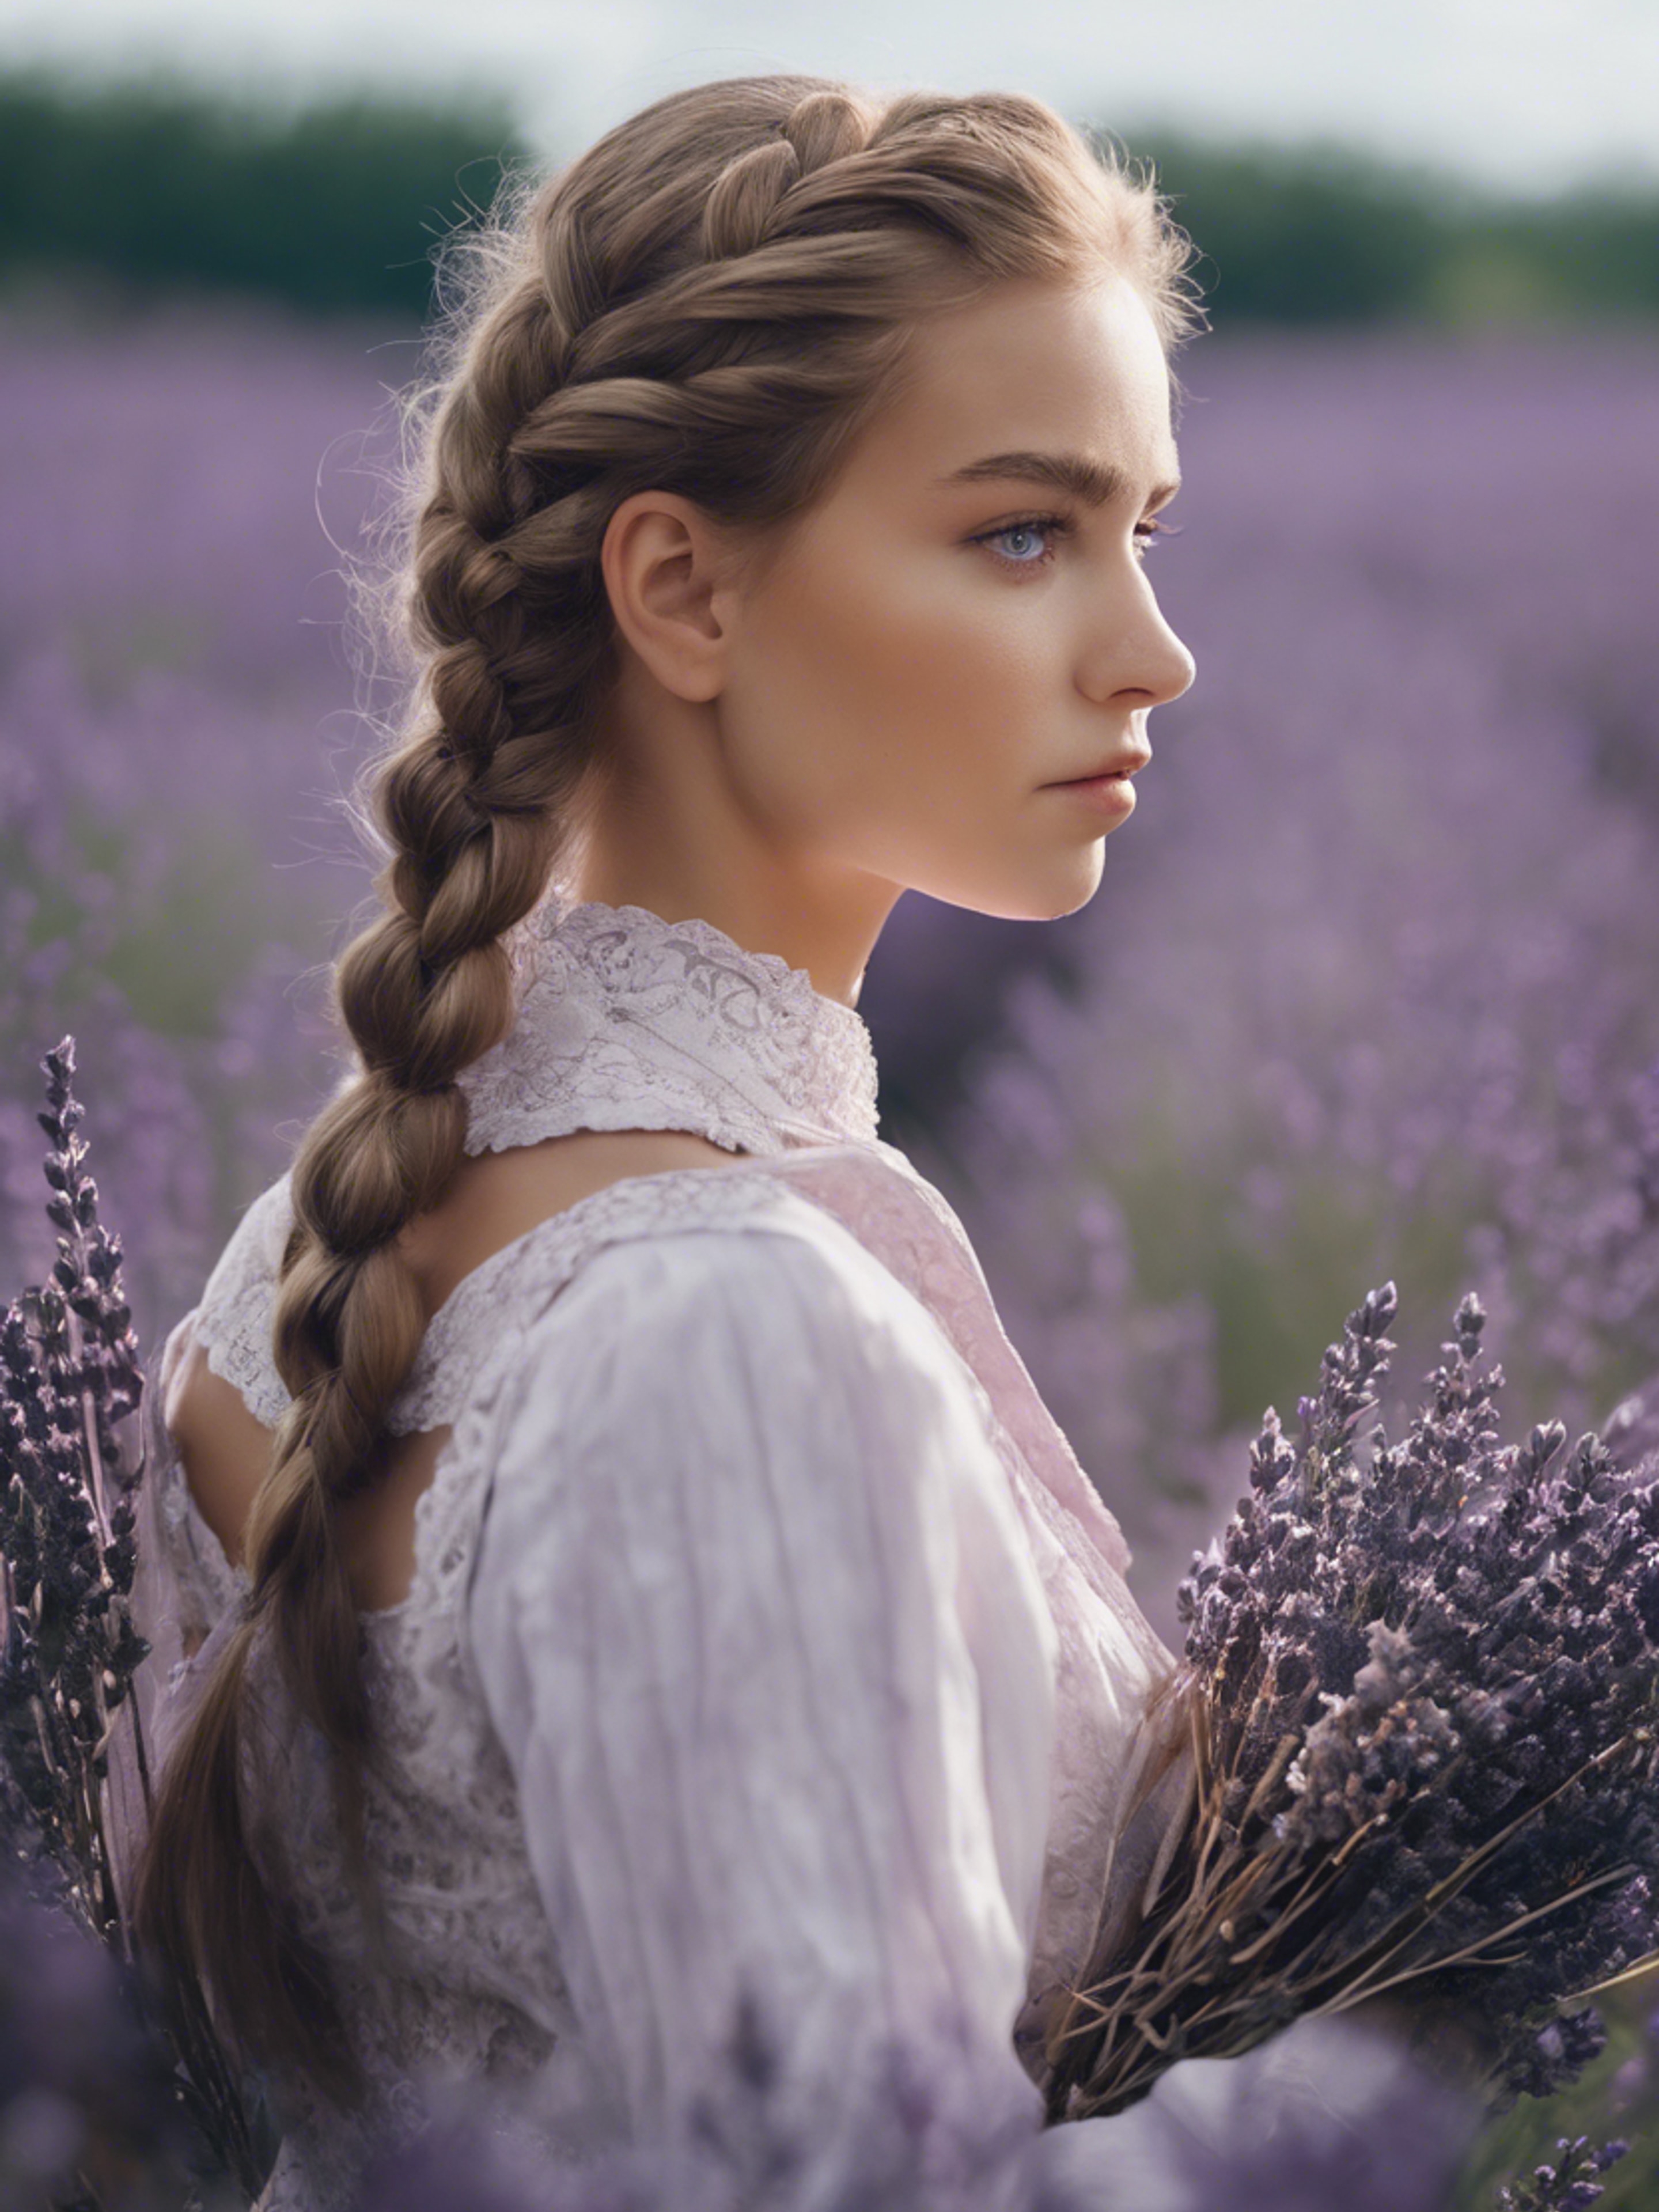 A pretty, light-eyed girl with her hair done in classic French braid, surrounded by a field of French lavender. Papel de parede[c71d23e36c7041a09435]